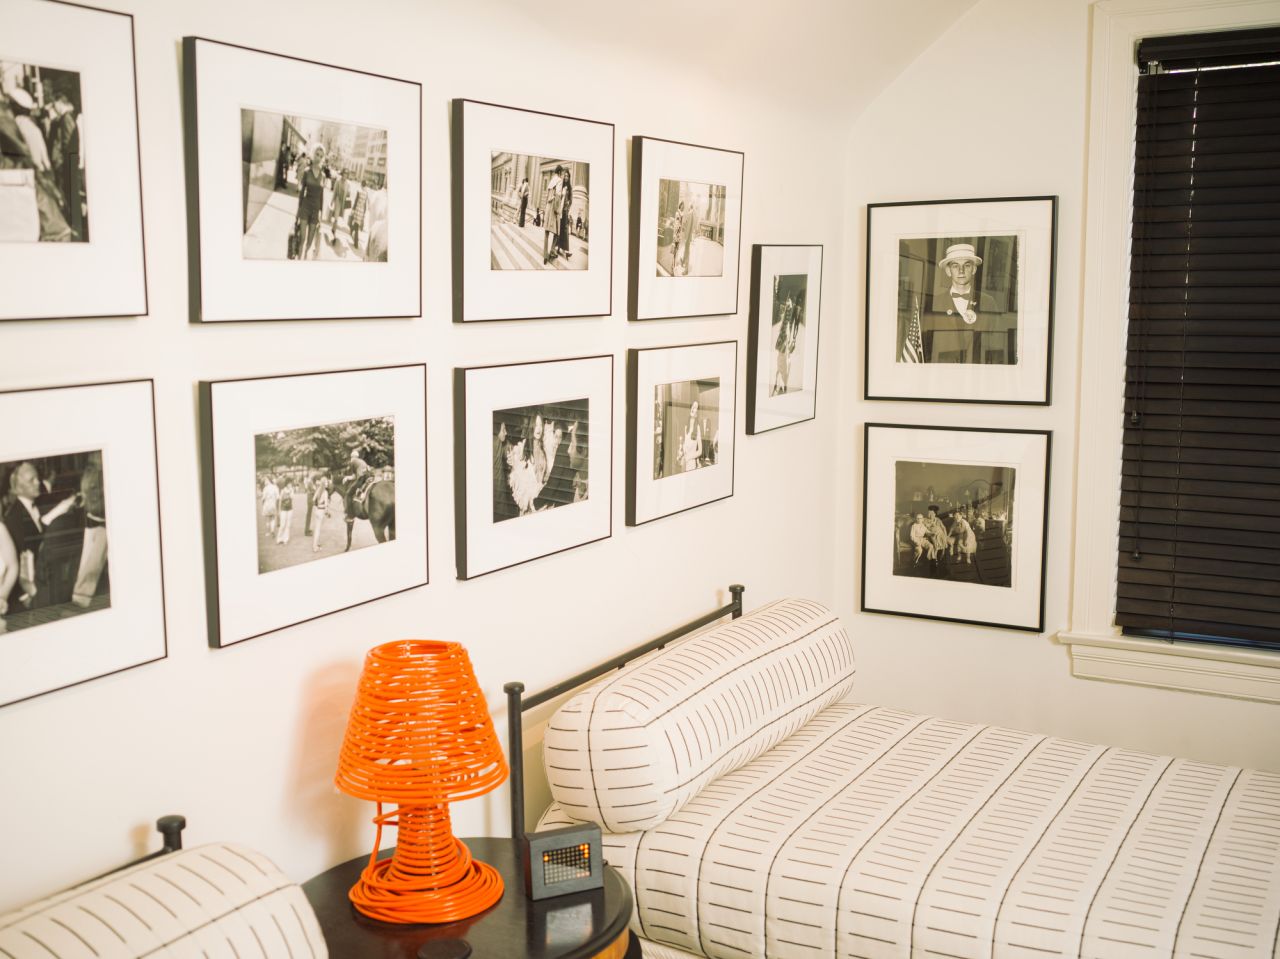 Photographs by Gary Wingrand and Diane Arbus in a guest room.